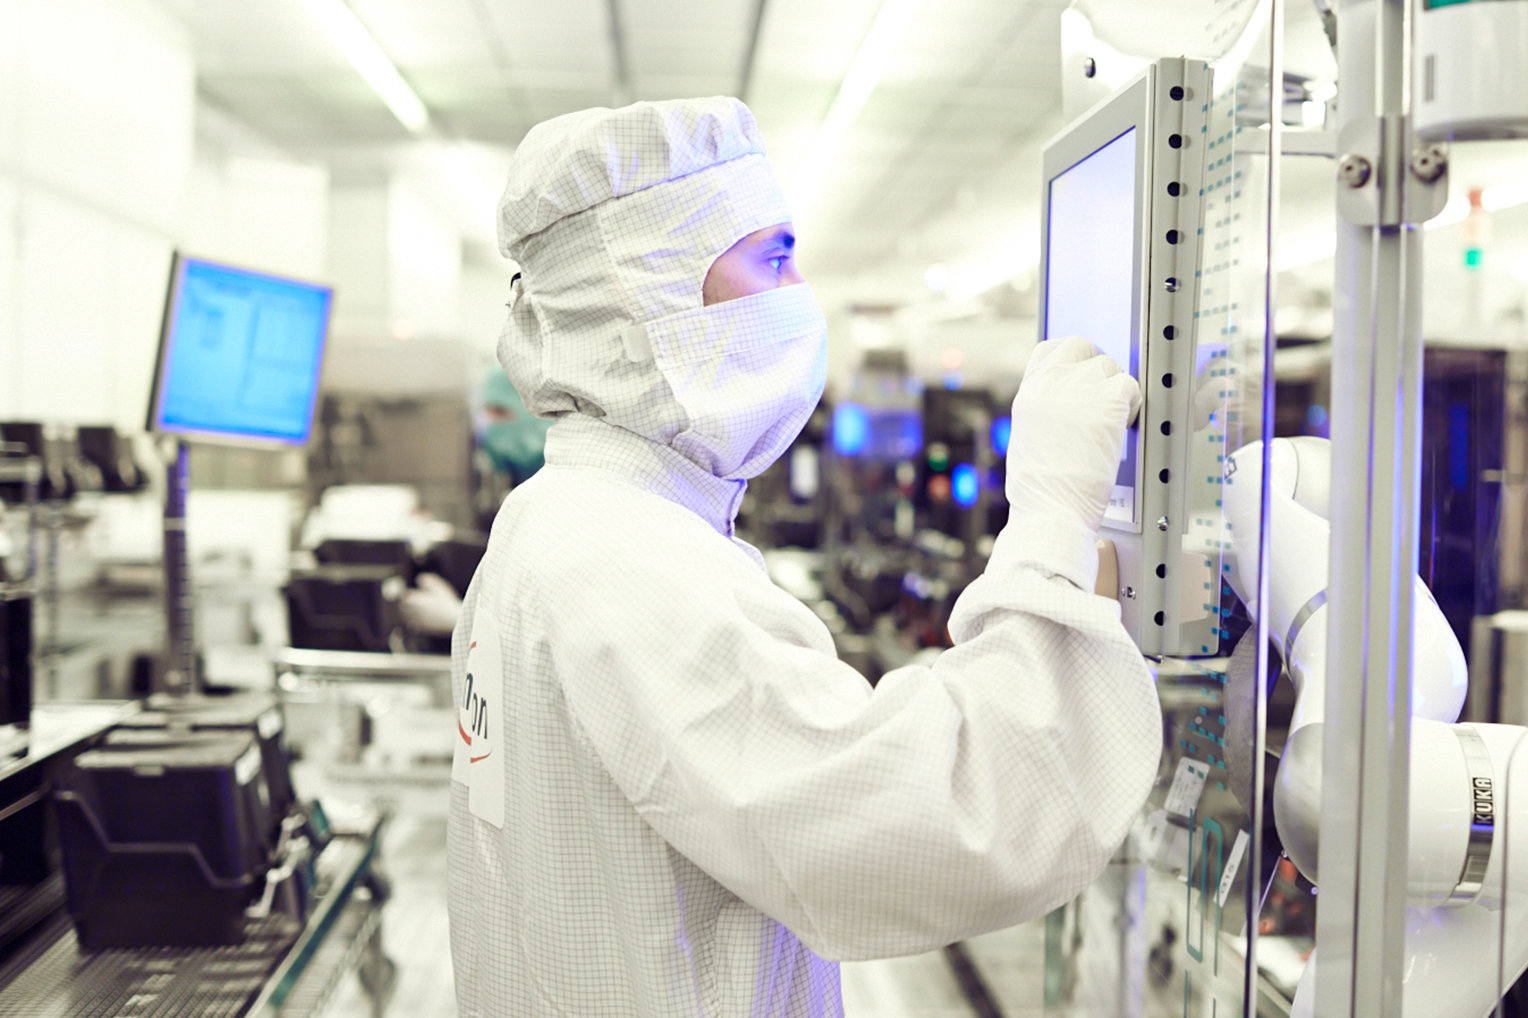 The clean room of the Infneon Technologies Austria